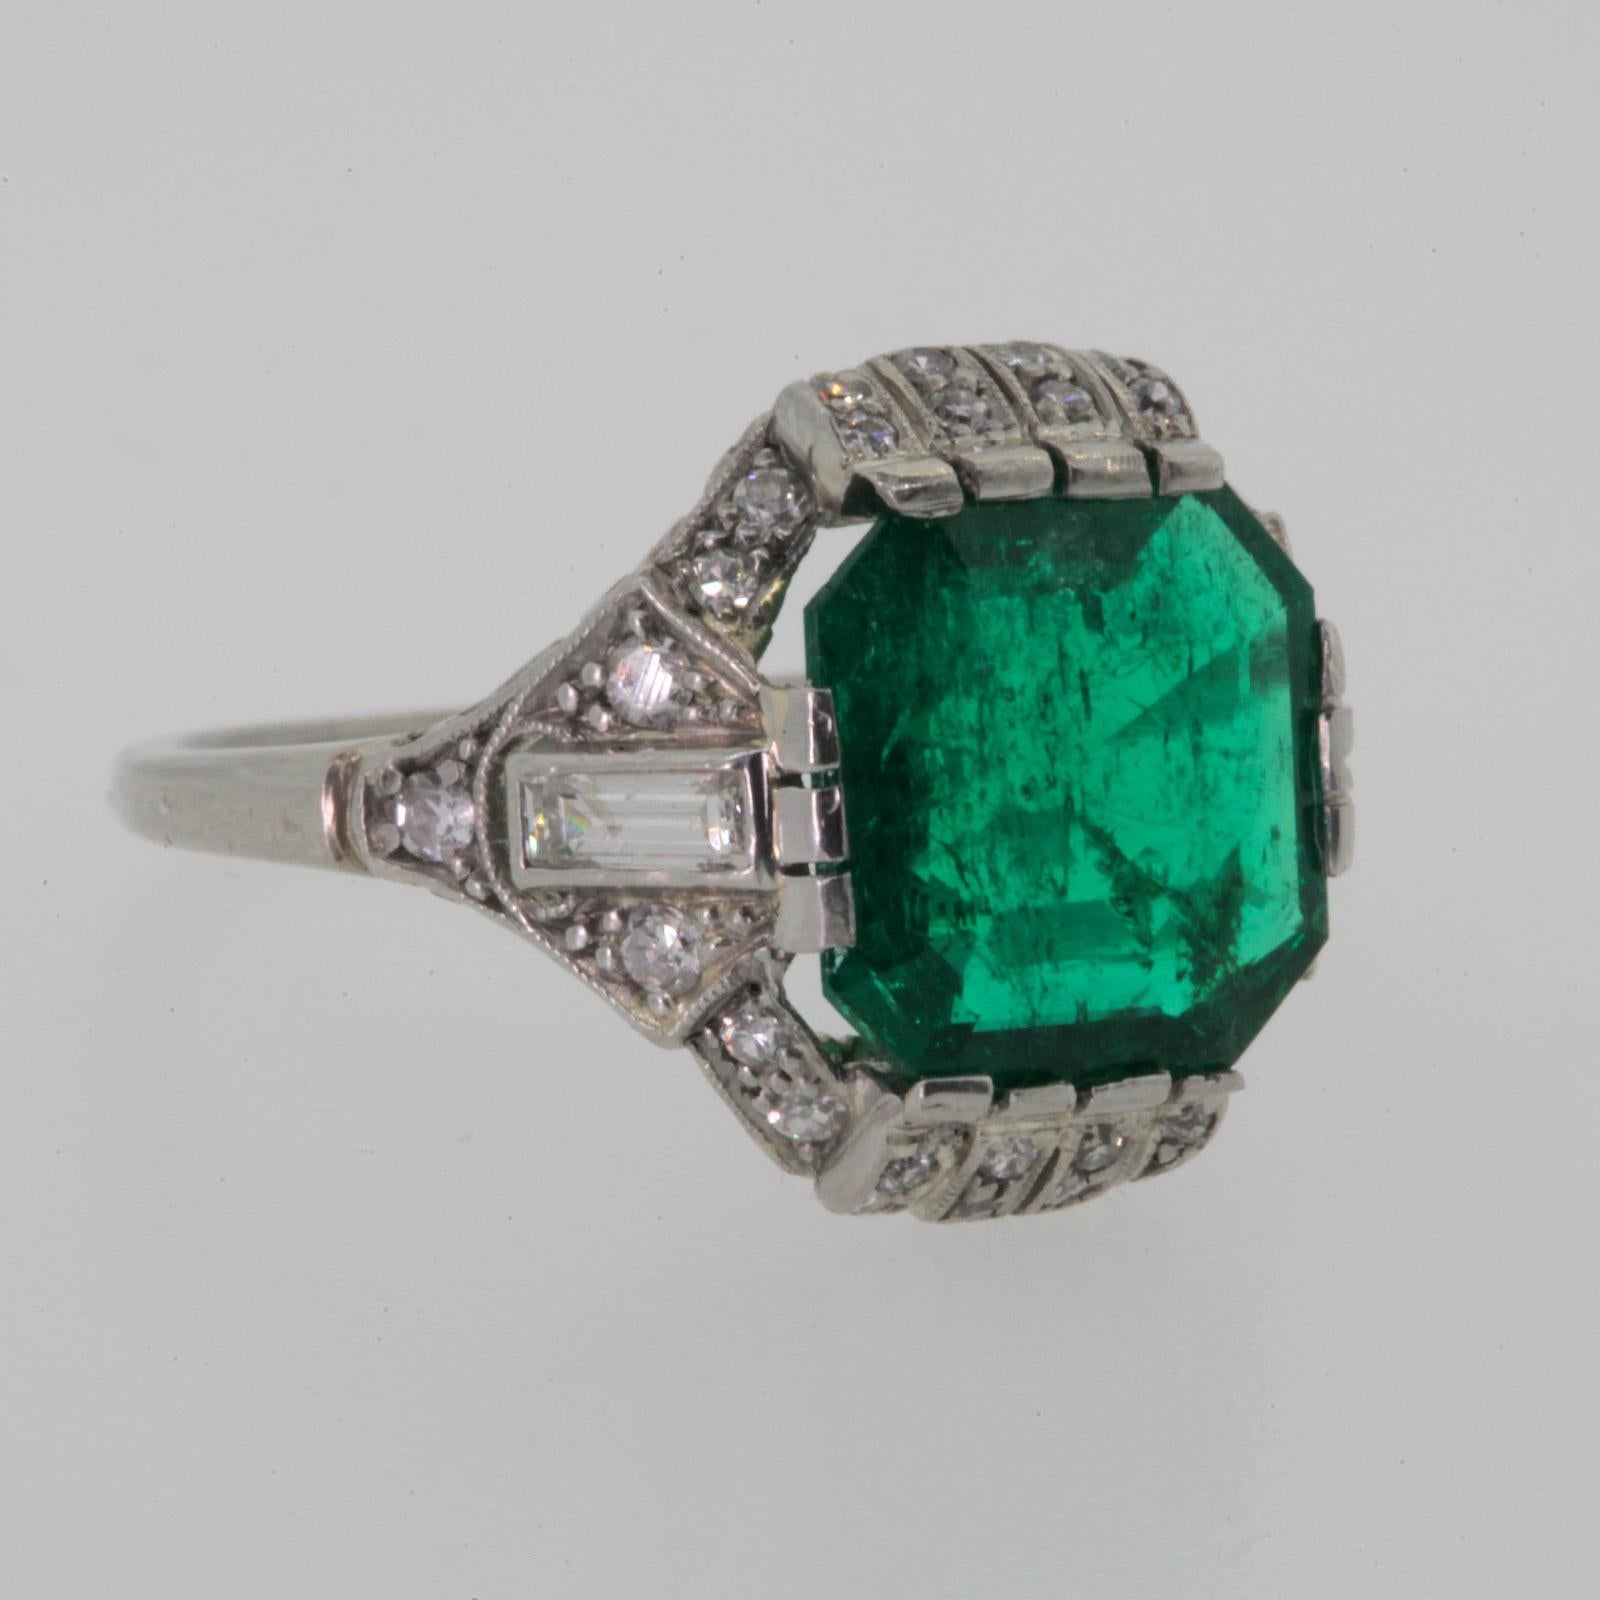 This stunning 1930s platinum ring features a gorgeous deep green cut corner 3.18 carats Emerald, accompanied by  G.I.A. report #5192177719 stating that the Emerald is of Colombian origin.  The lovely Art Deco setting with open swirl gallery shows